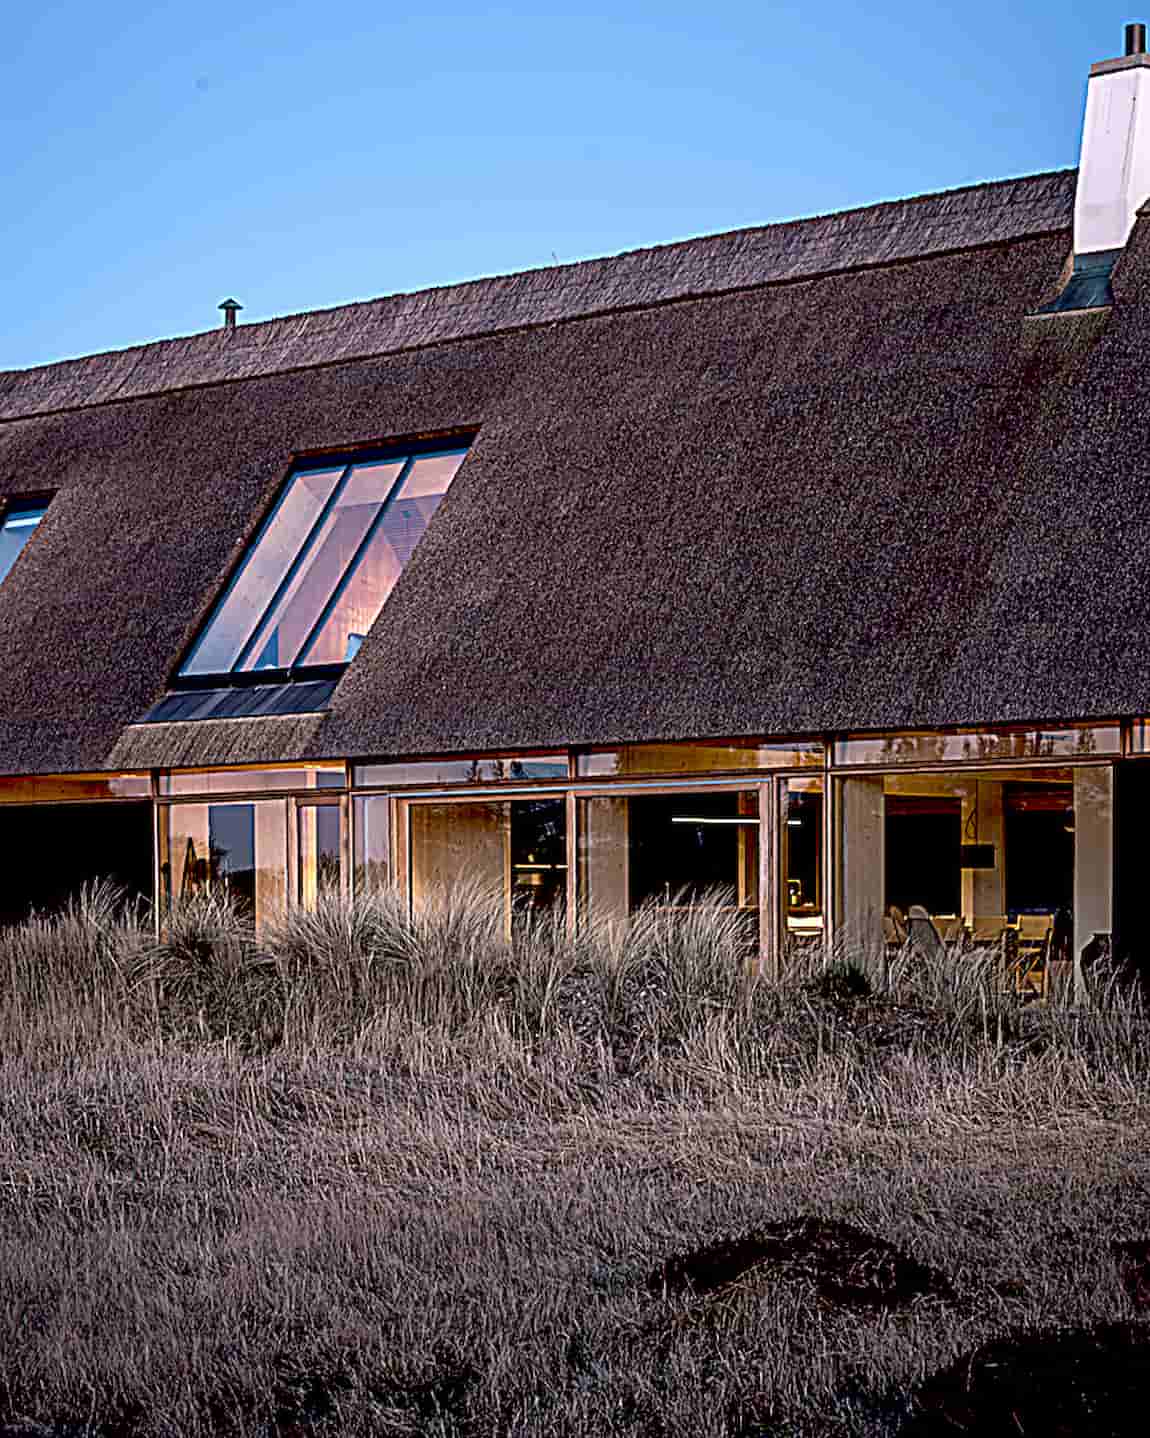 The Summer House Skagen Klitgård pays Tribute to local Architecture and the History of the Town